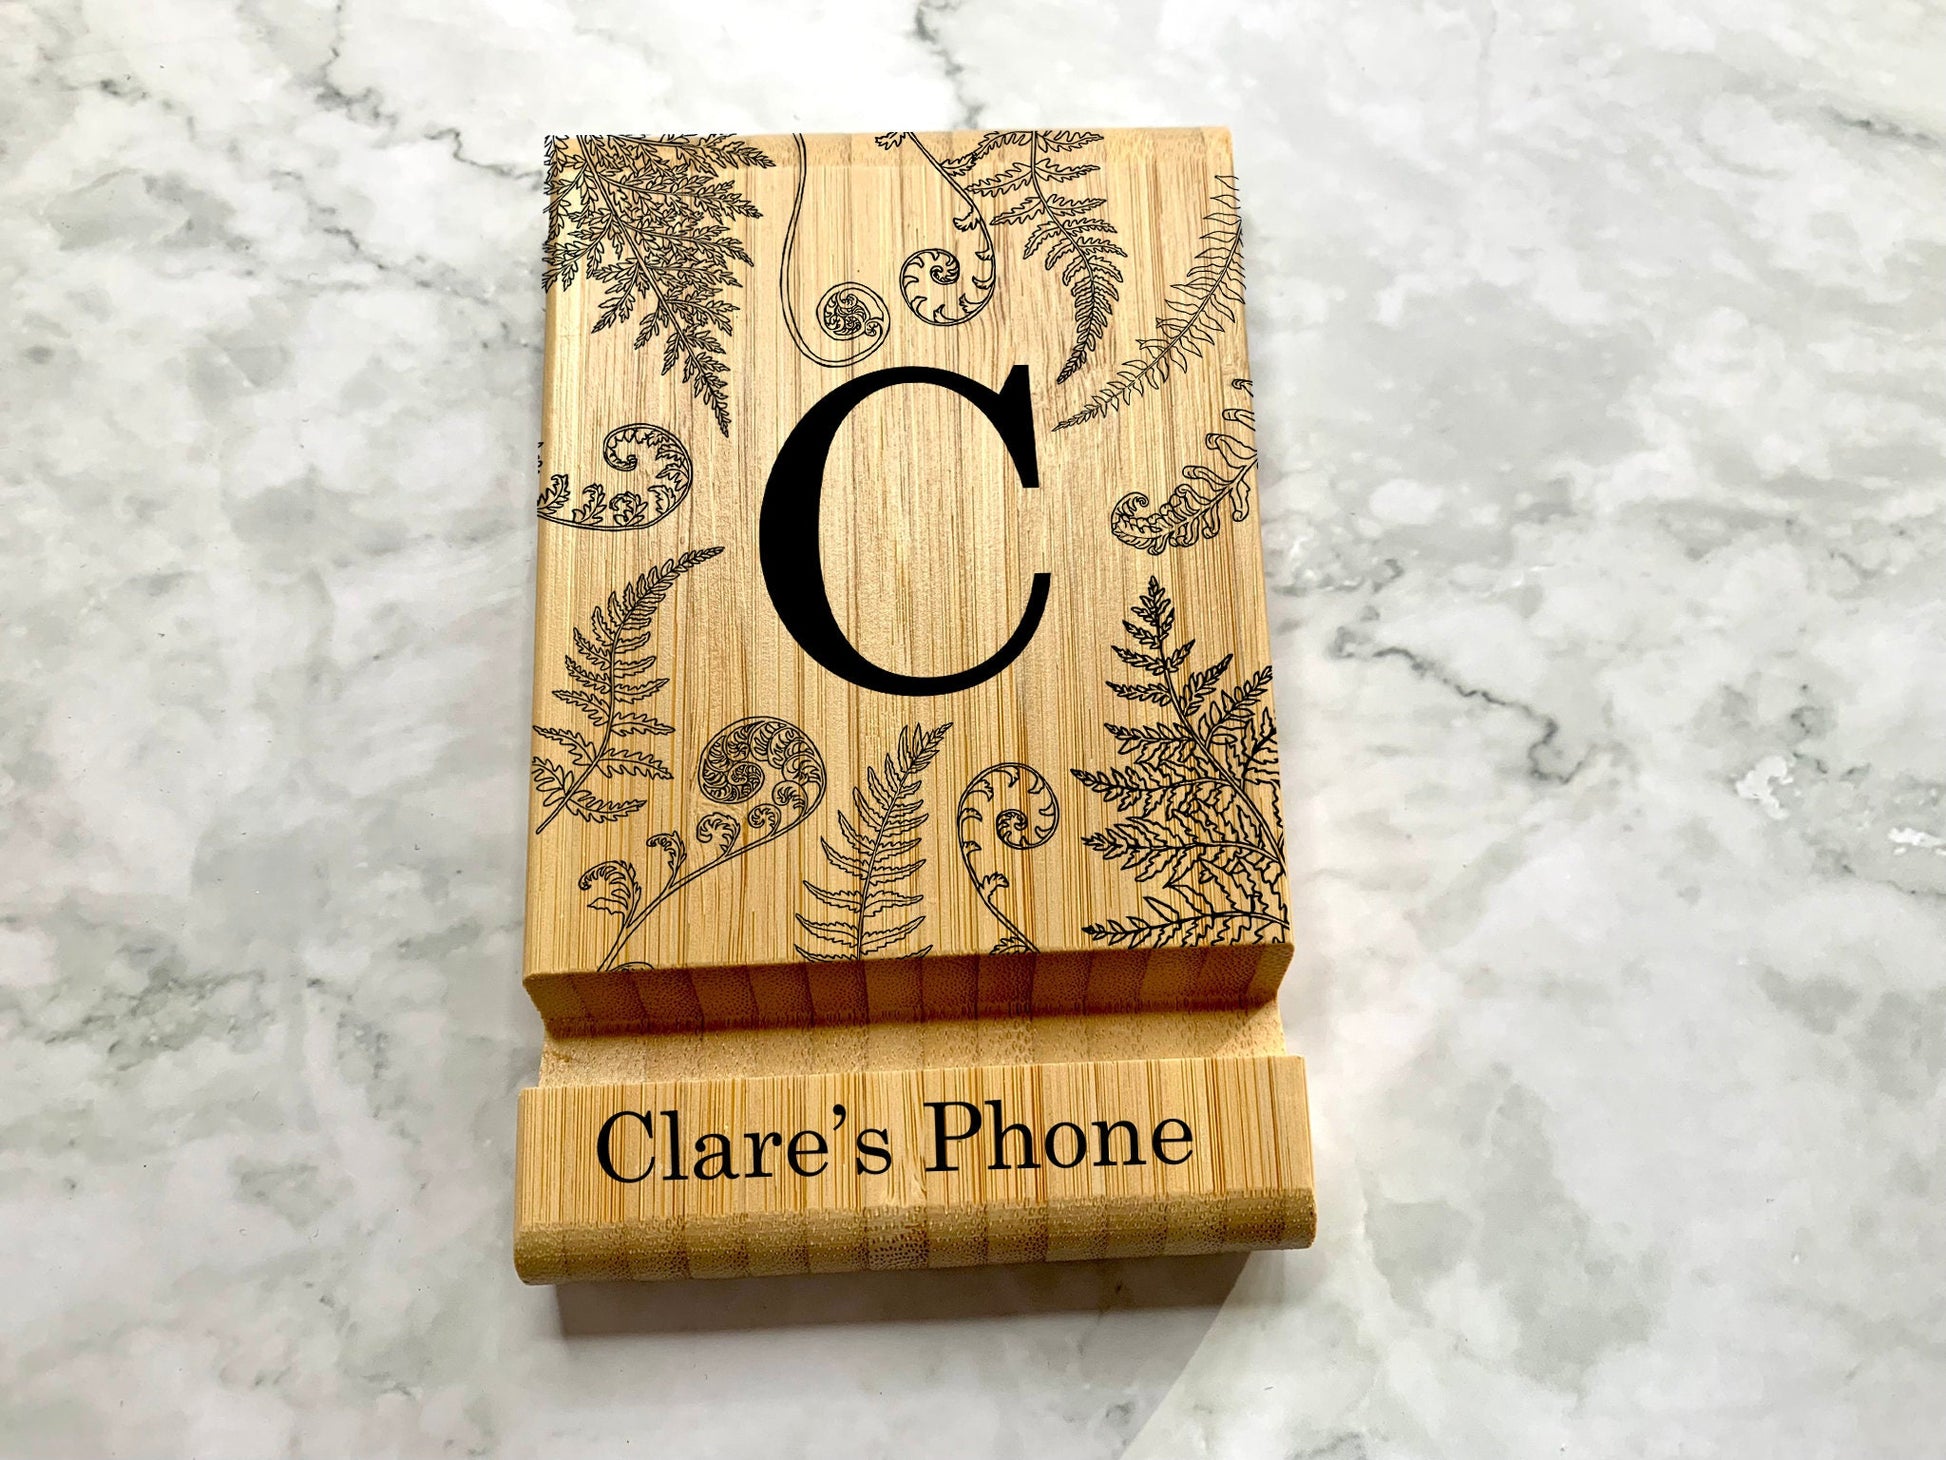 Personalised Engraved Bamboo Wooden Phone Holder, iPad Holder, Tablet Holder, iPad Stand, Tablet Stand, Phone Stand with Ferns - Resplendent Aurora